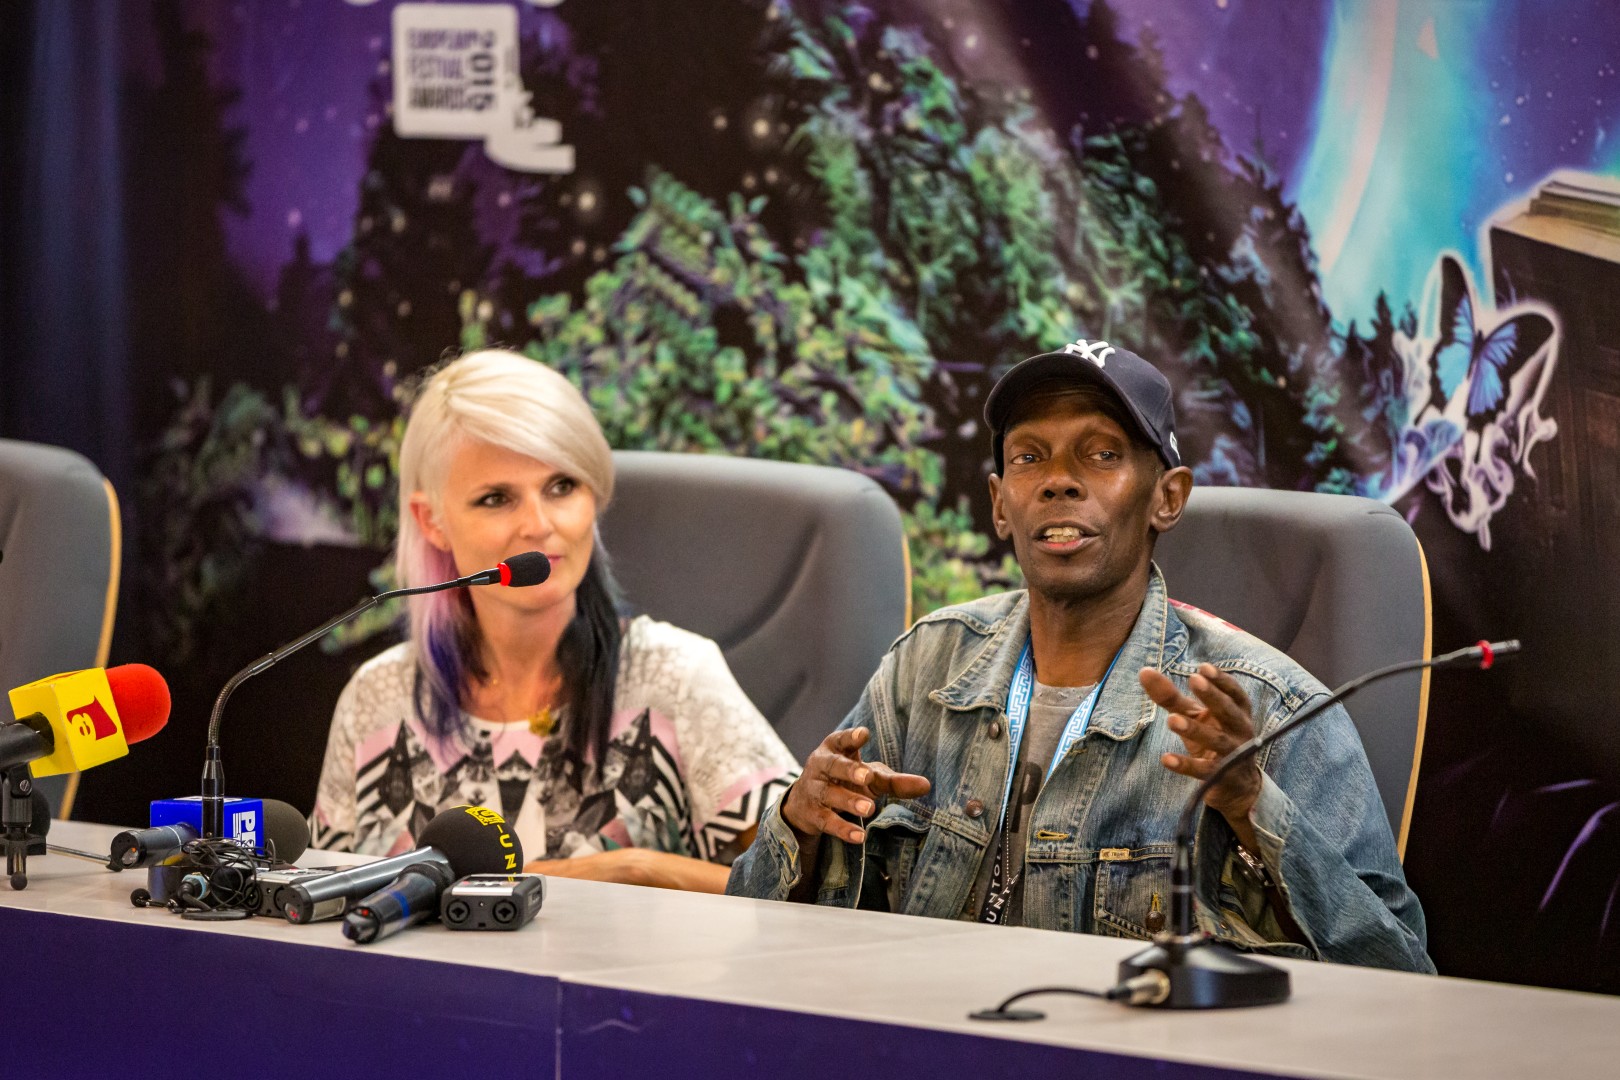 Faithless at Cluj Arena in Cluj-Napoca on August 4, 2016 (5660c54dde)